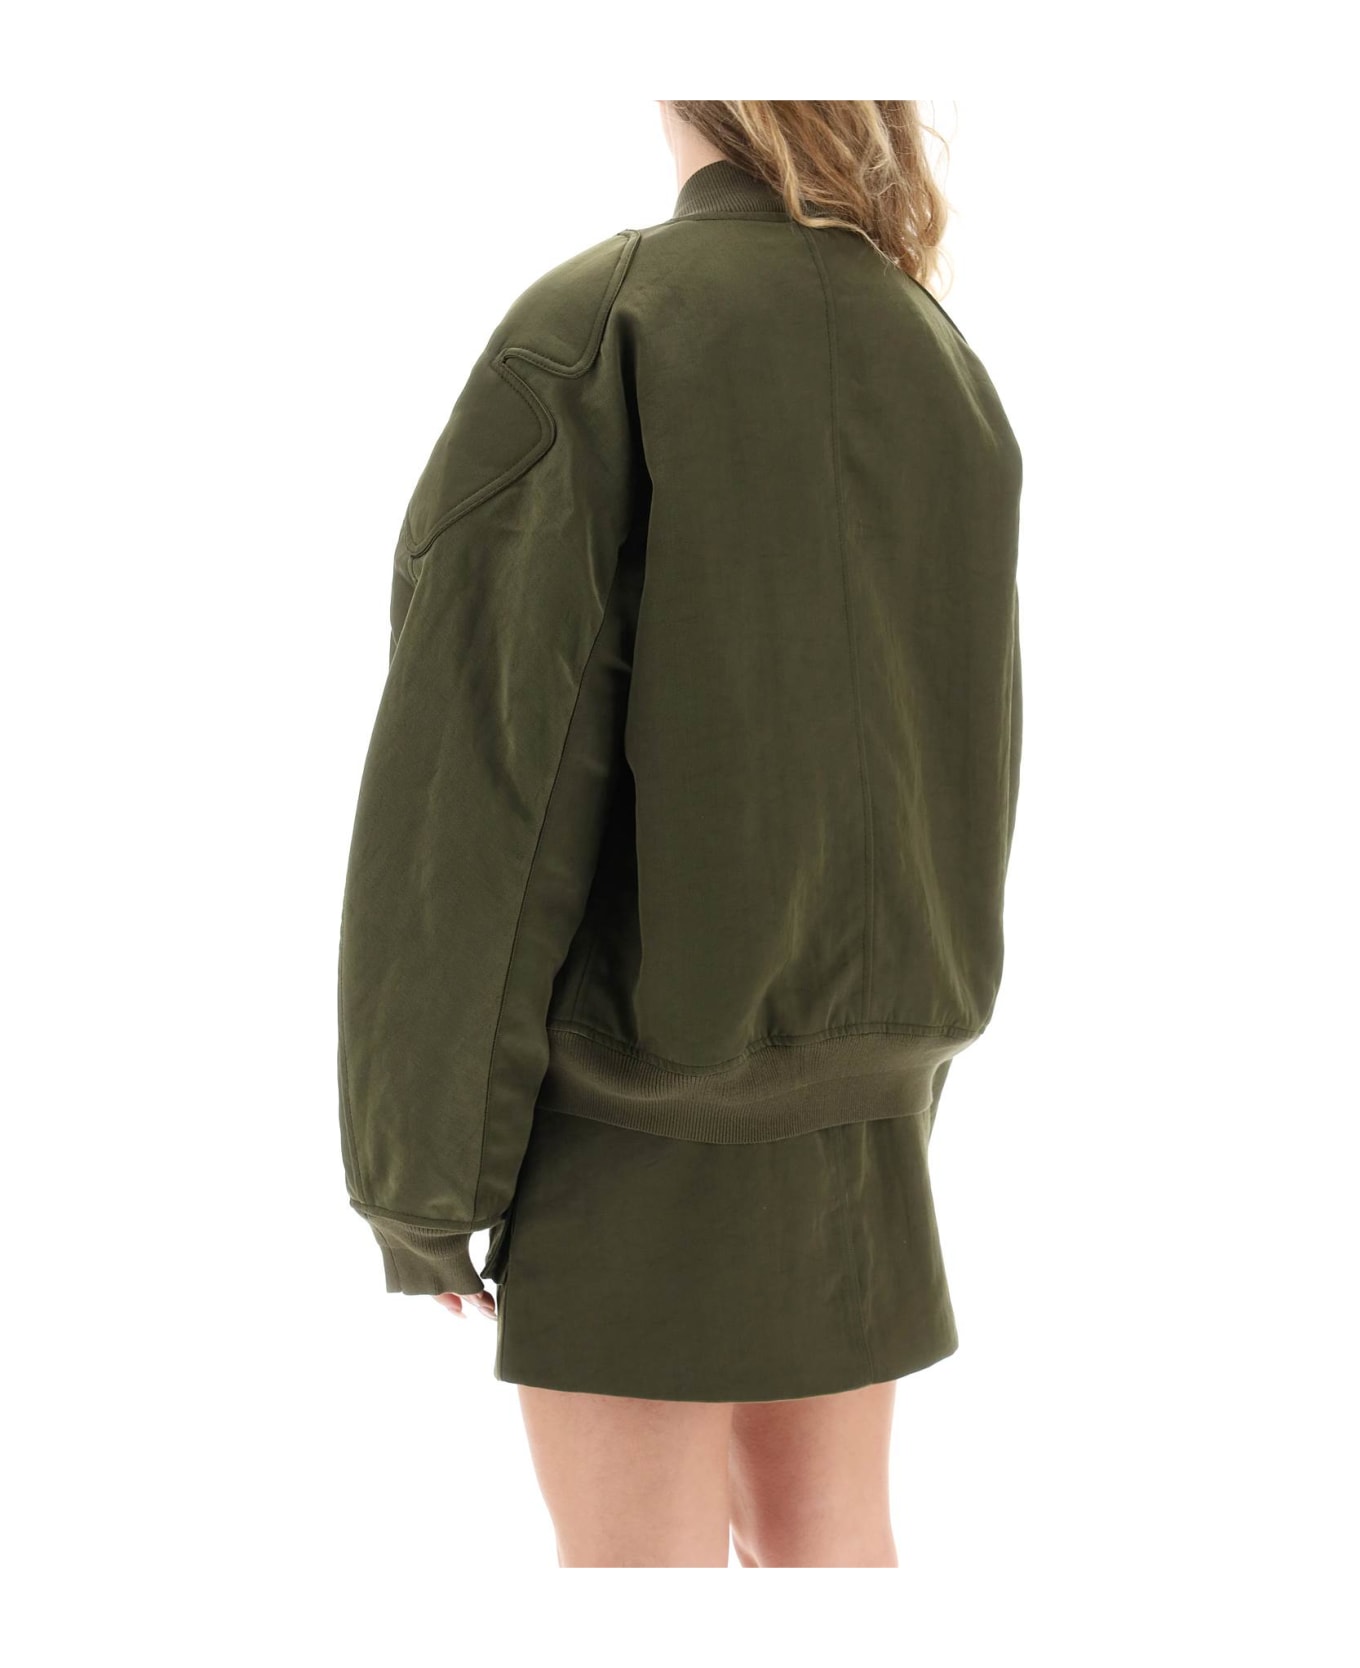 Dion Lee Oversized Technical Nylon Bomber - MILITARY GREEN (Green)